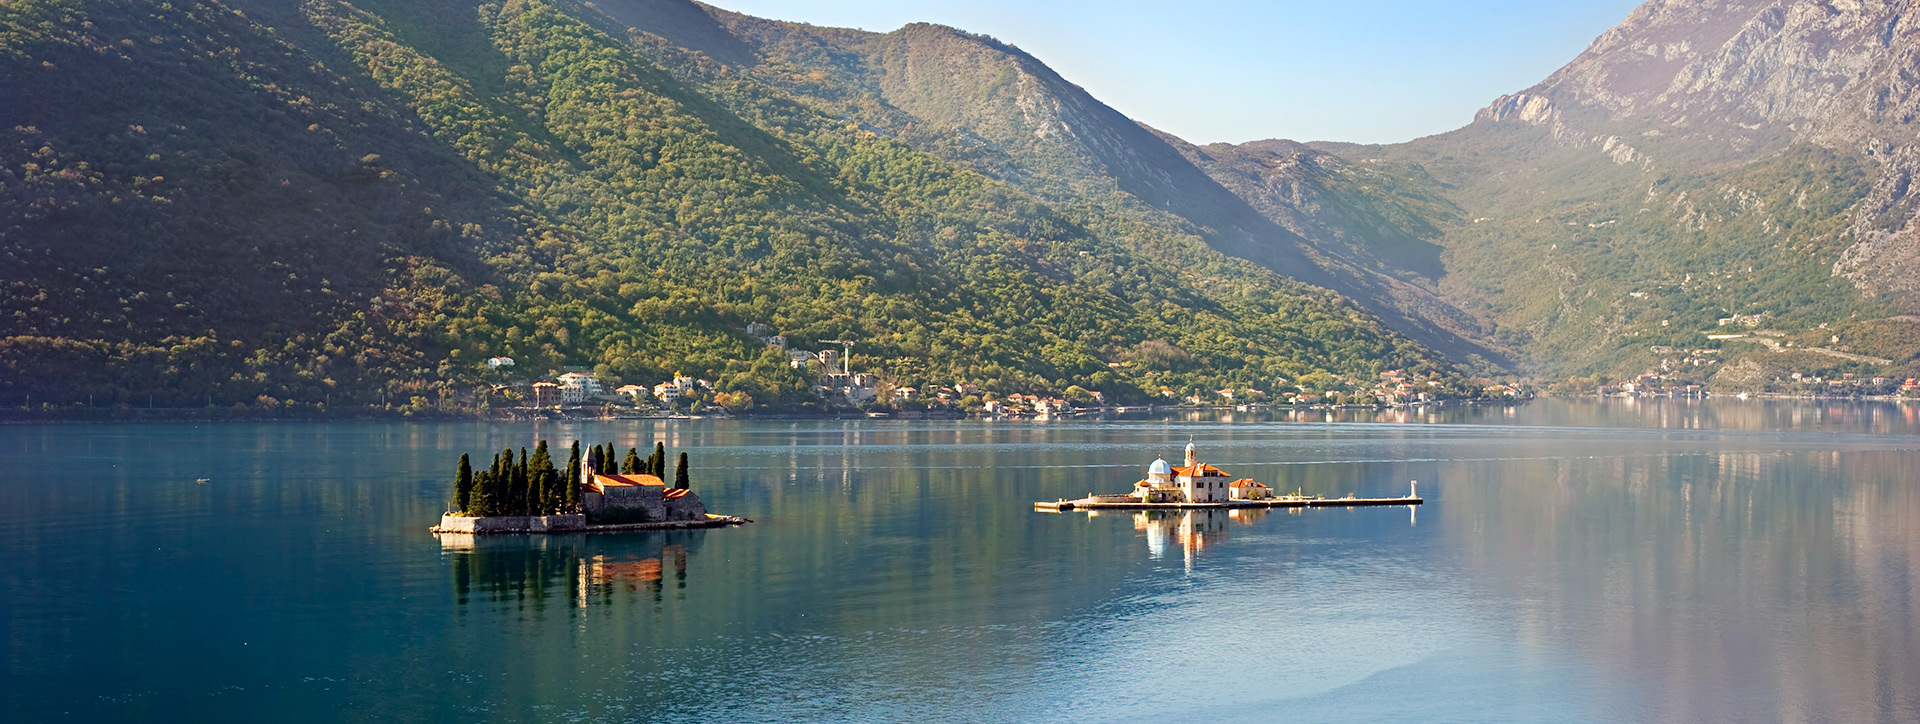 The Islands of St. George and Virgin on the Reef, opposite Perast, Montenegro